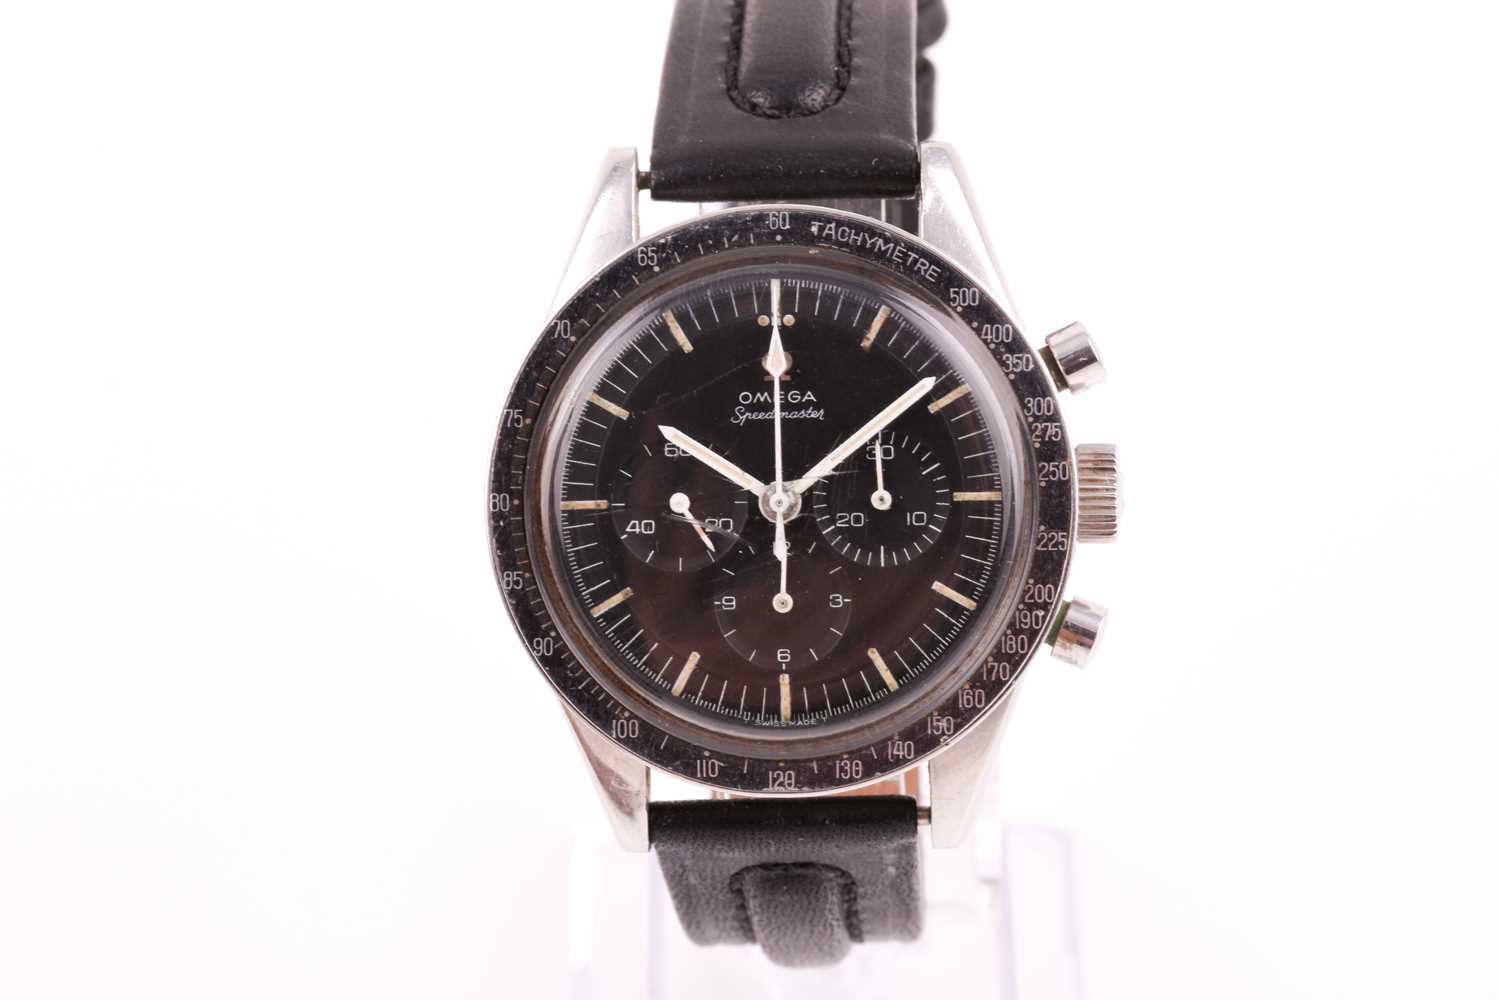 A very rare 1964 Omega Speedmaster reference 105.003-64 'Ed White' stainless steel chronograph